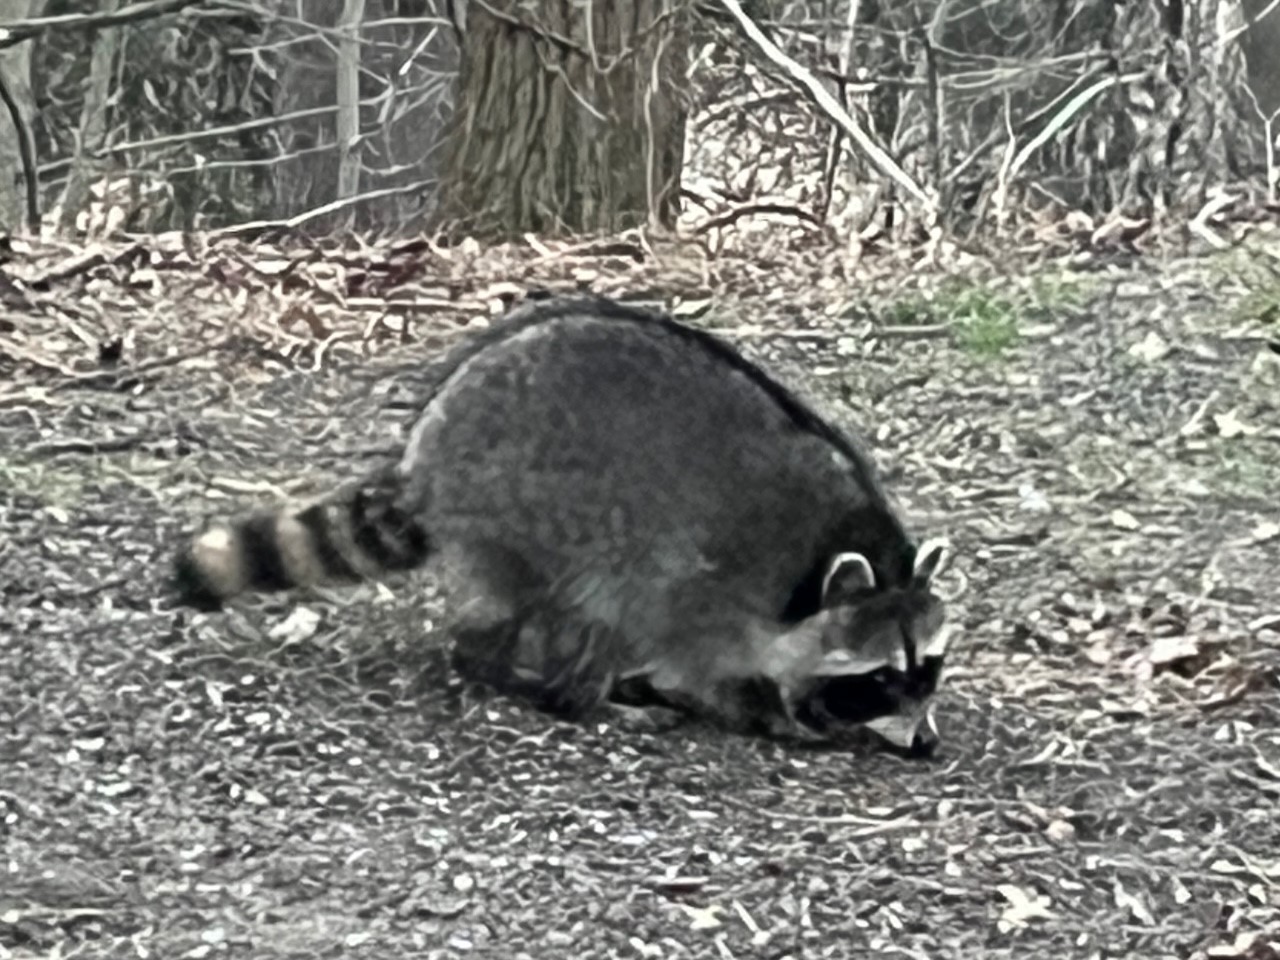 Our healthy raccoon visitor